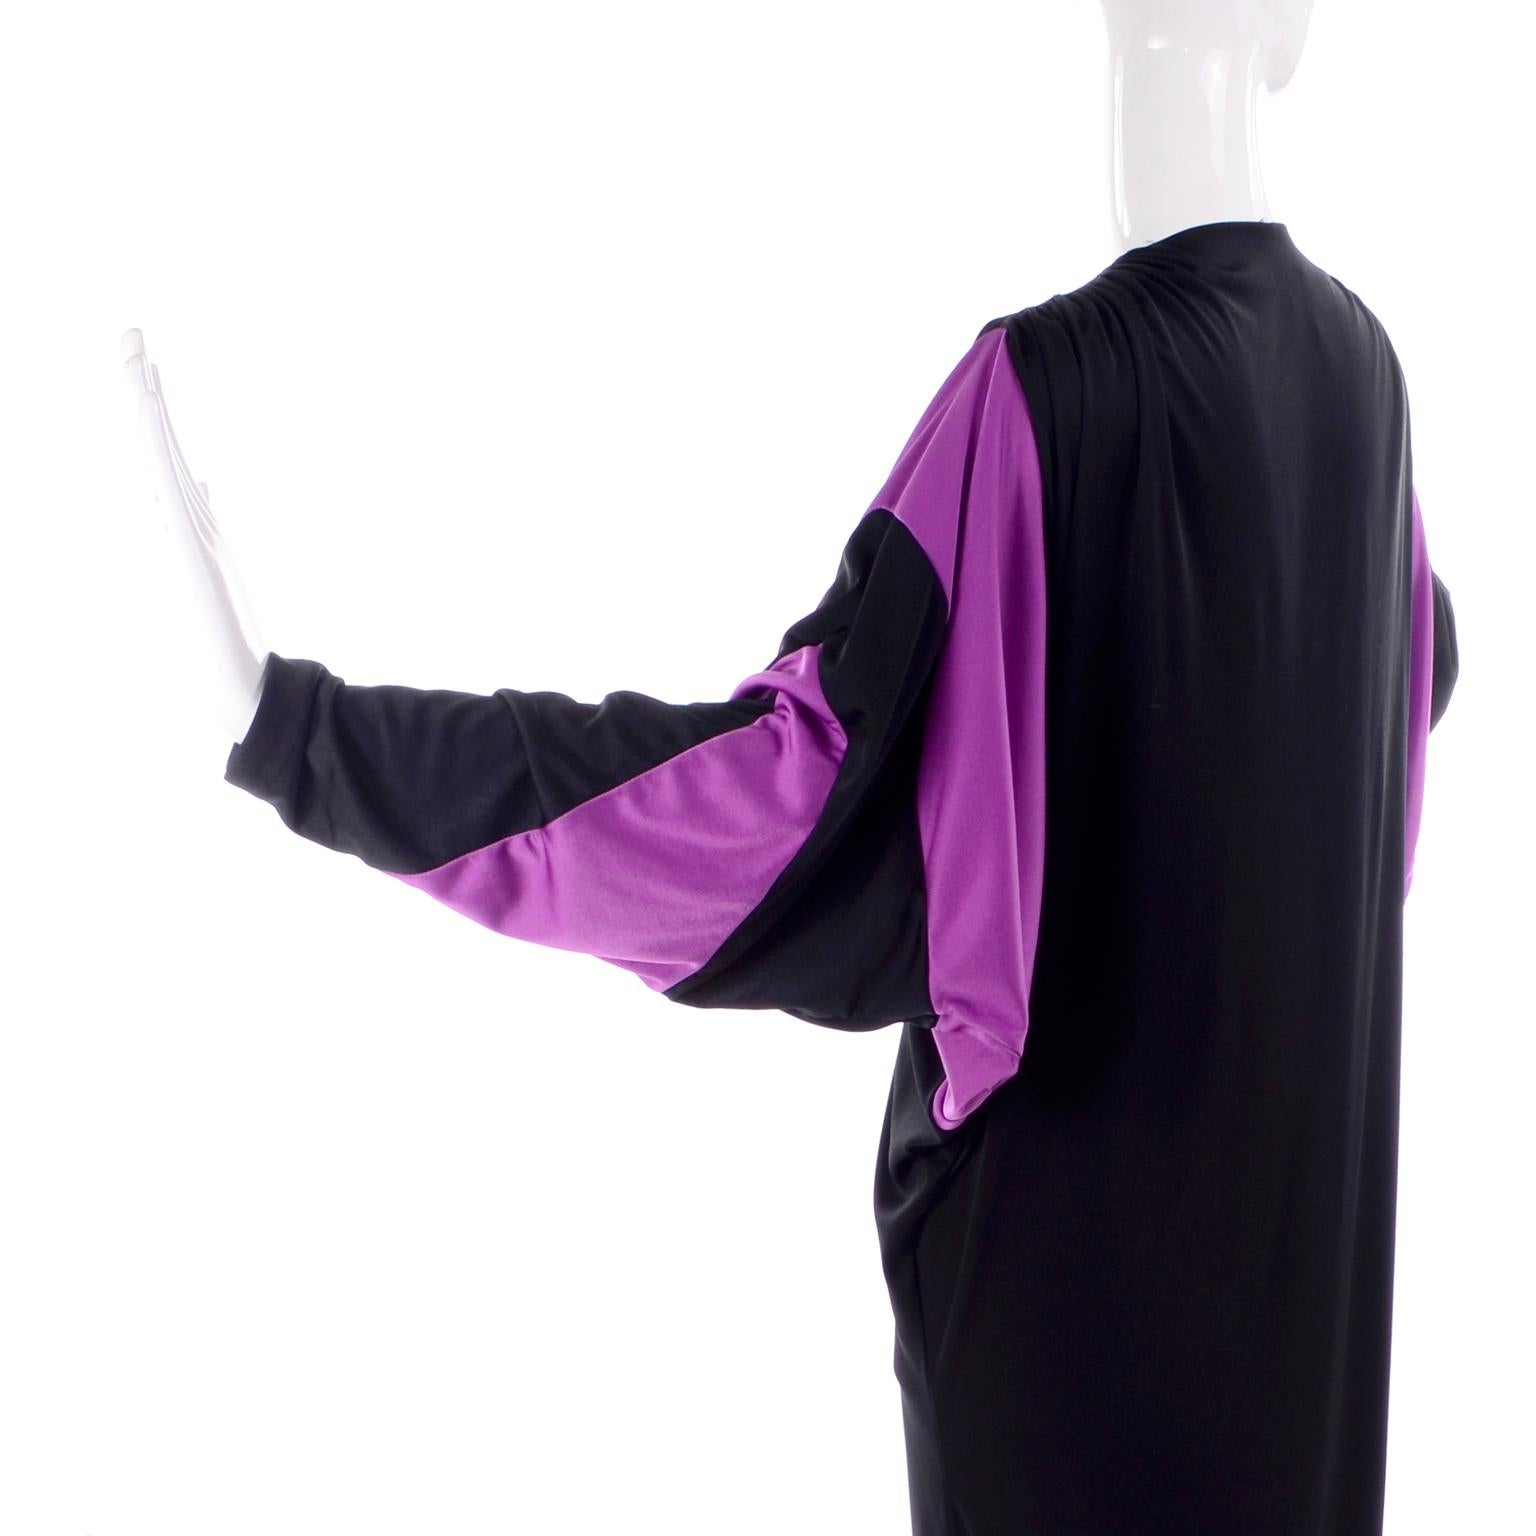 Women's Bill Tice Purple and Black Jersey Caftan Dress Dramatic Batwing Sleeves One Size